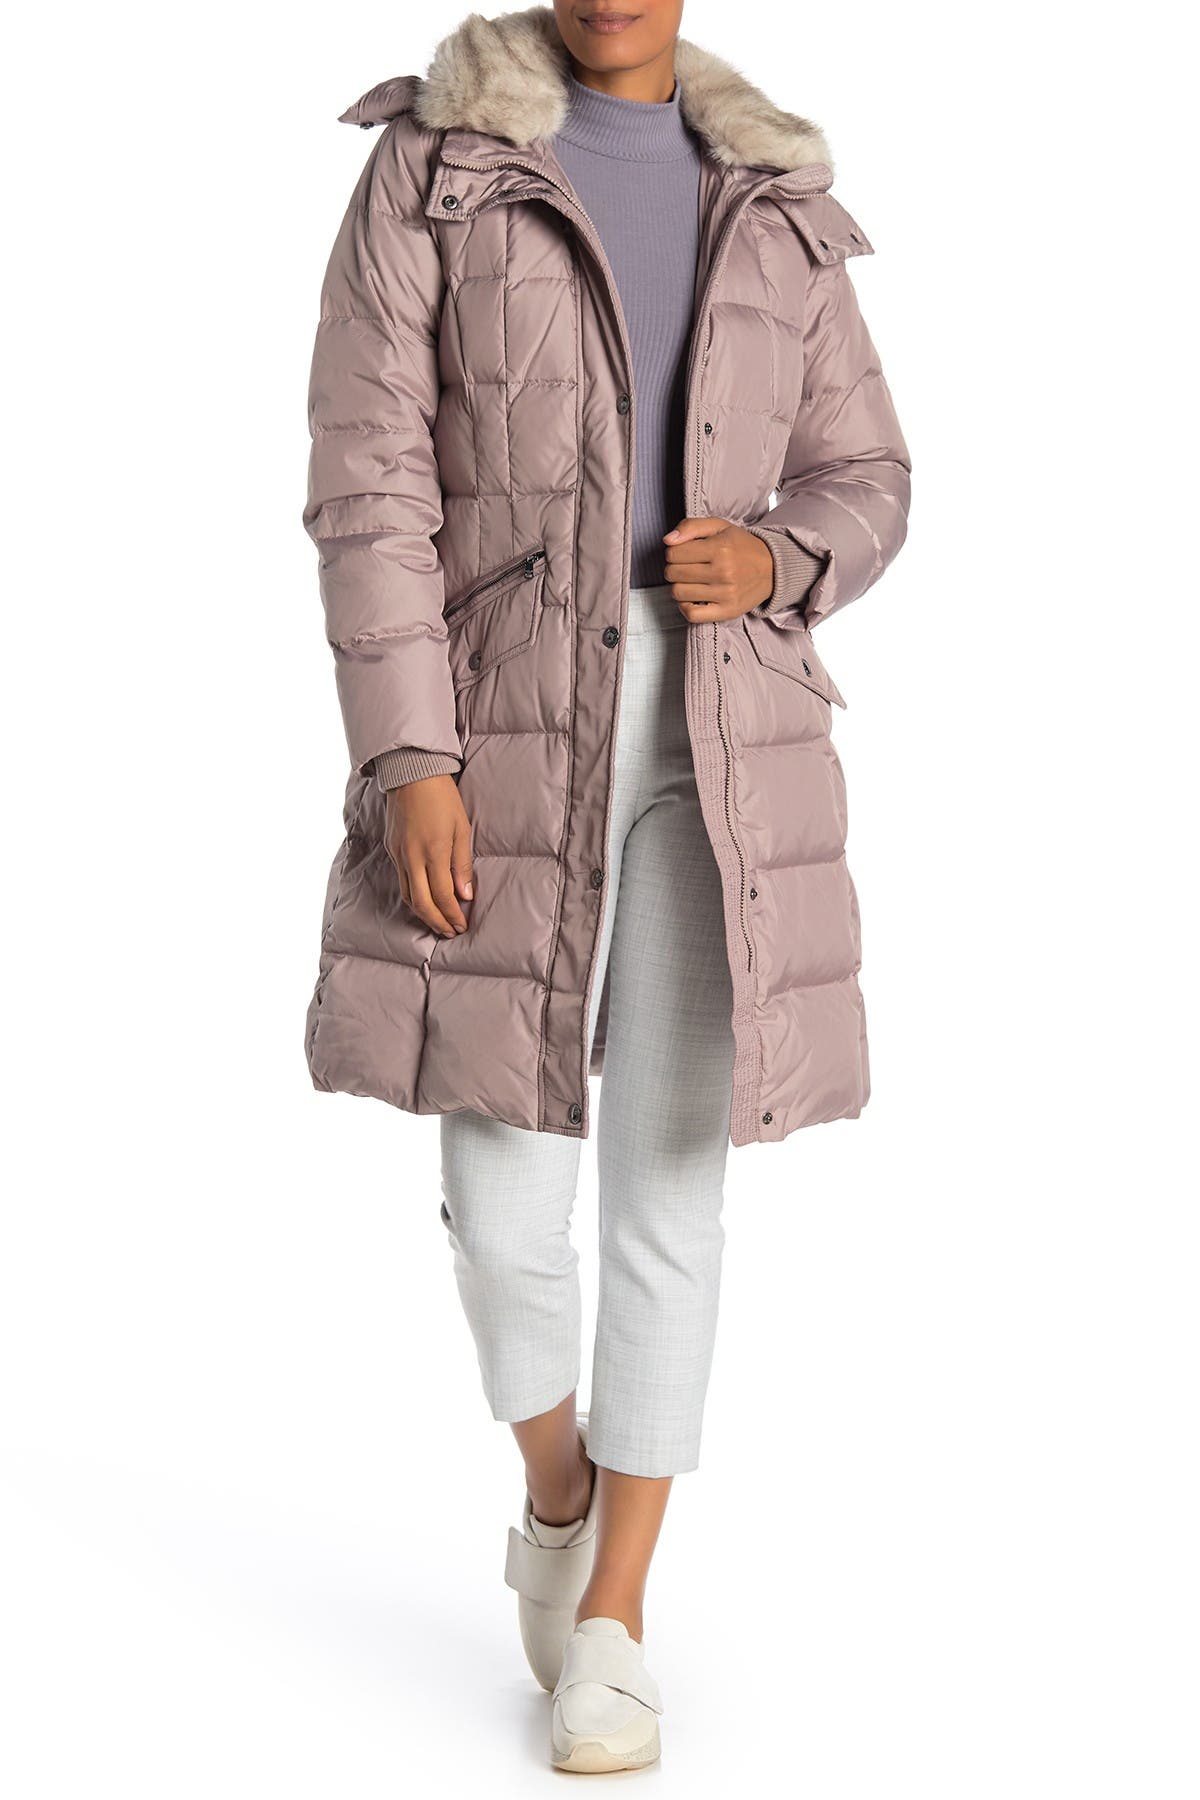 london fog long down coat,Free delivery 